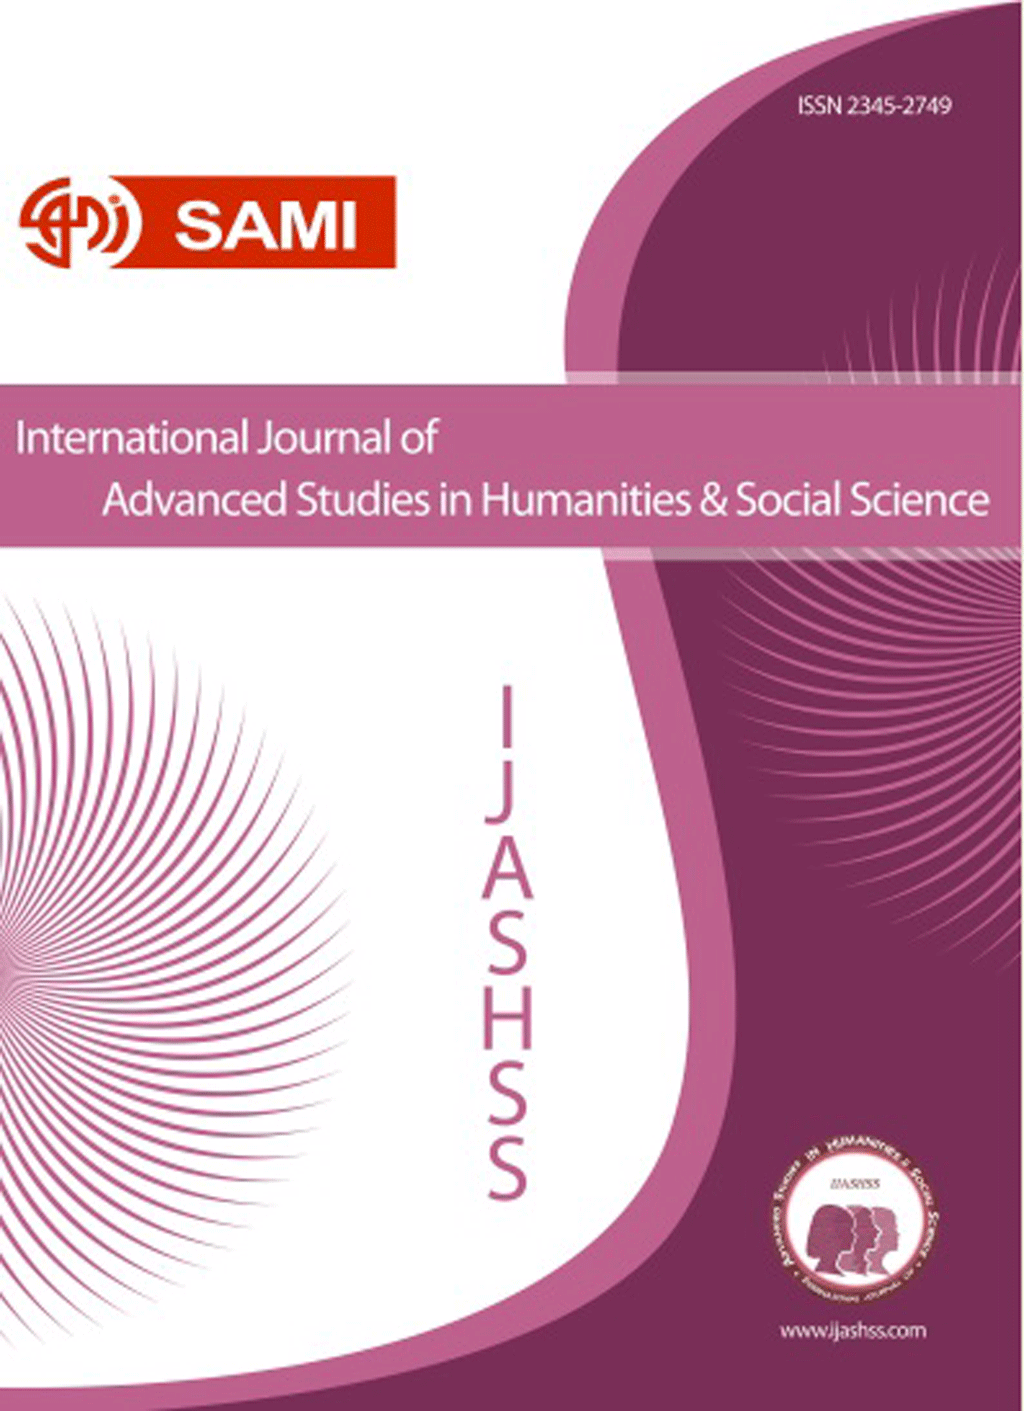 International Journal of Advanced Studies in Humanities and Social Science - April 2021, Volume 10 - Issue 2